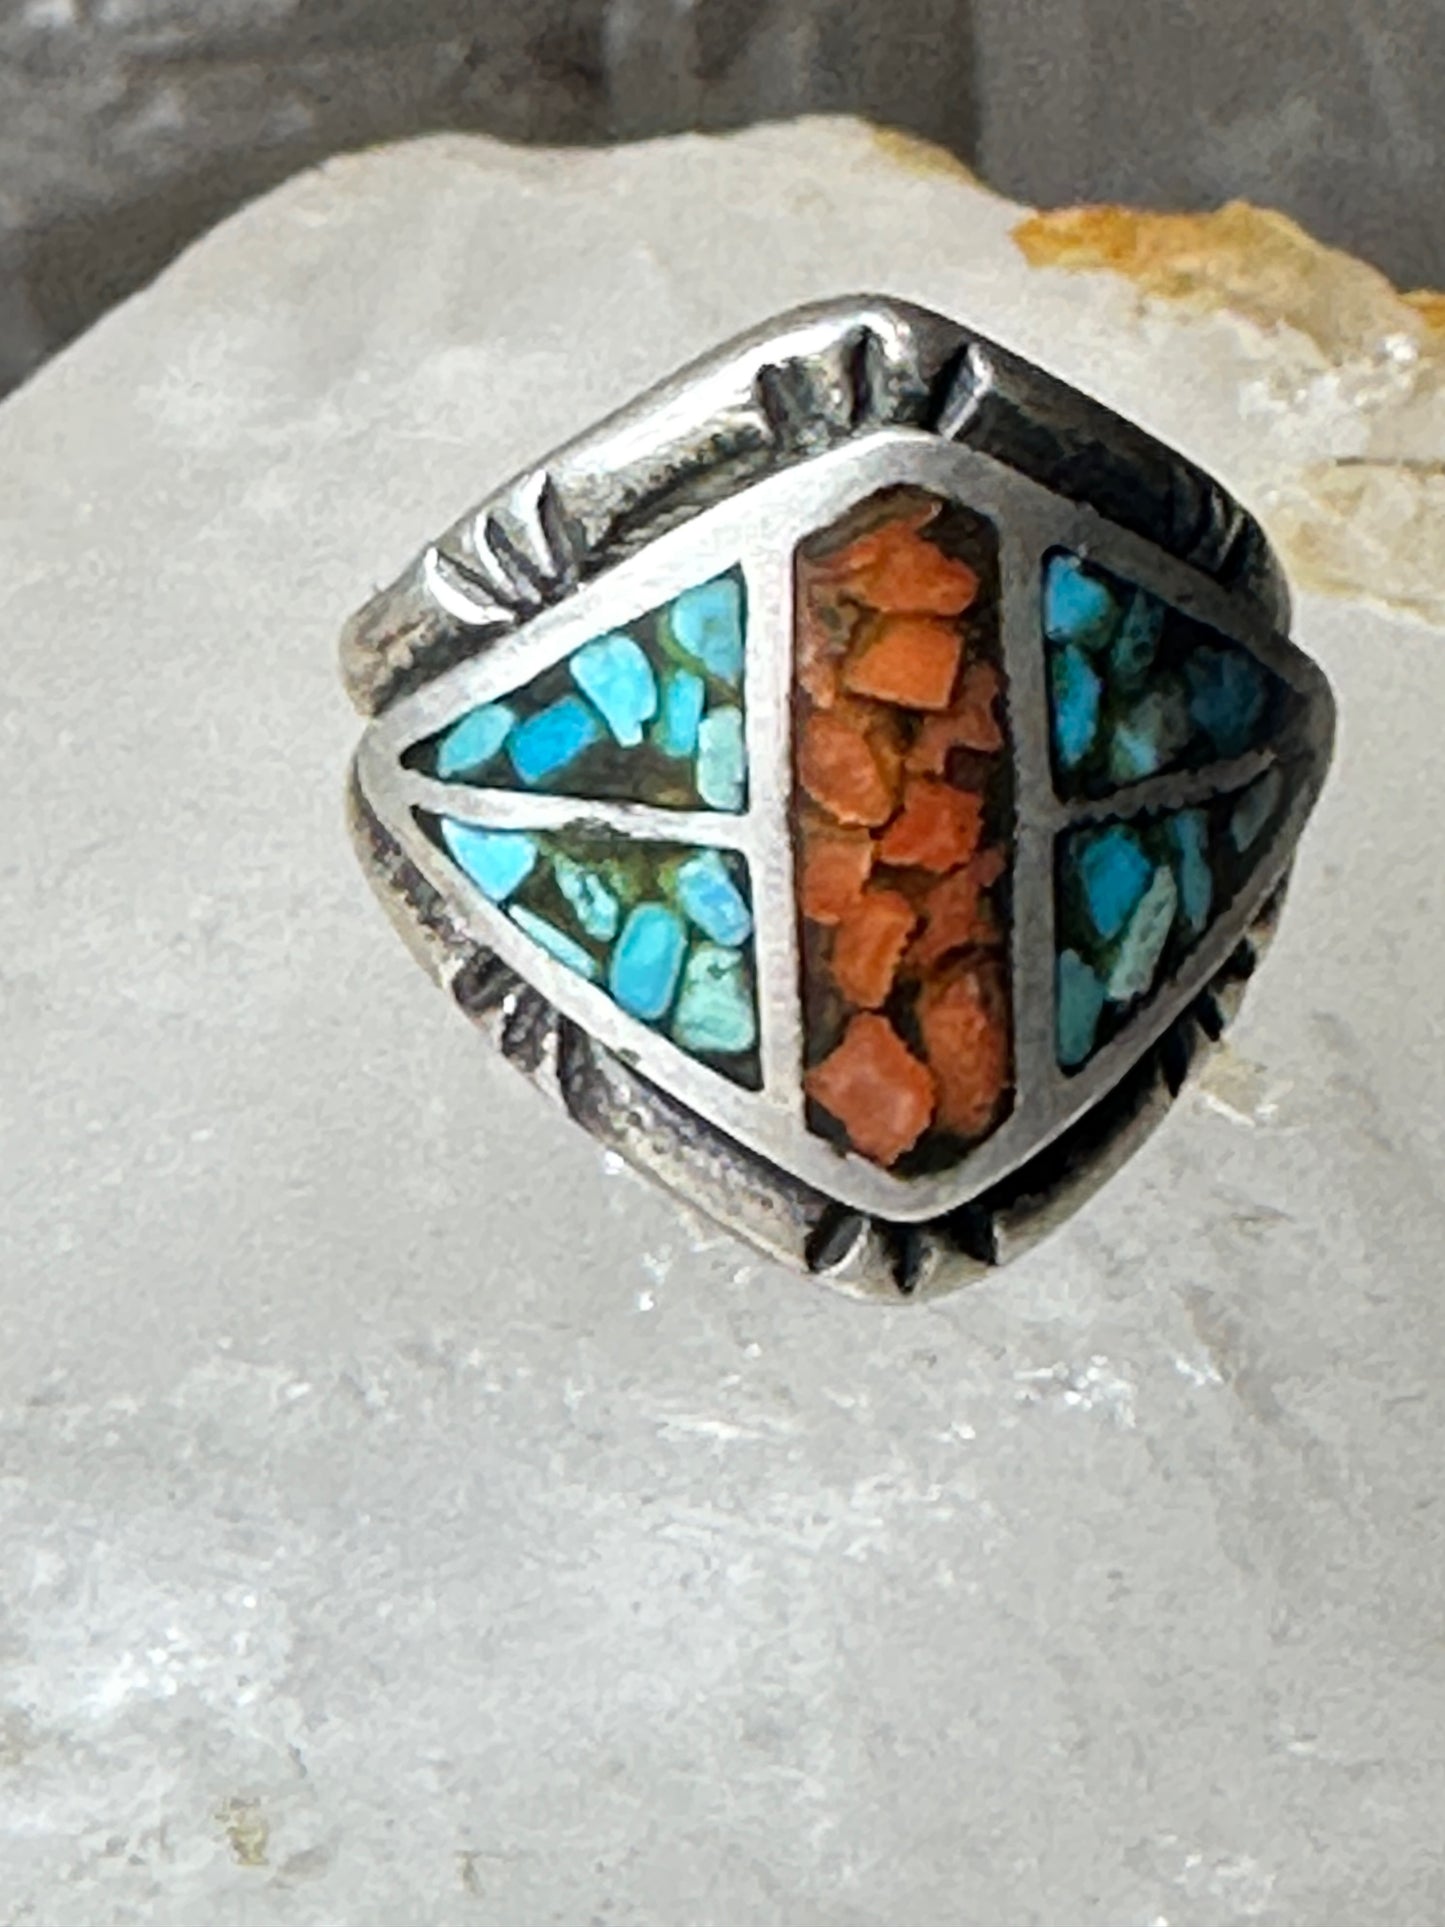 Cigar band ring size 4 pinky turquoise coral chips southwestern sterling silver women